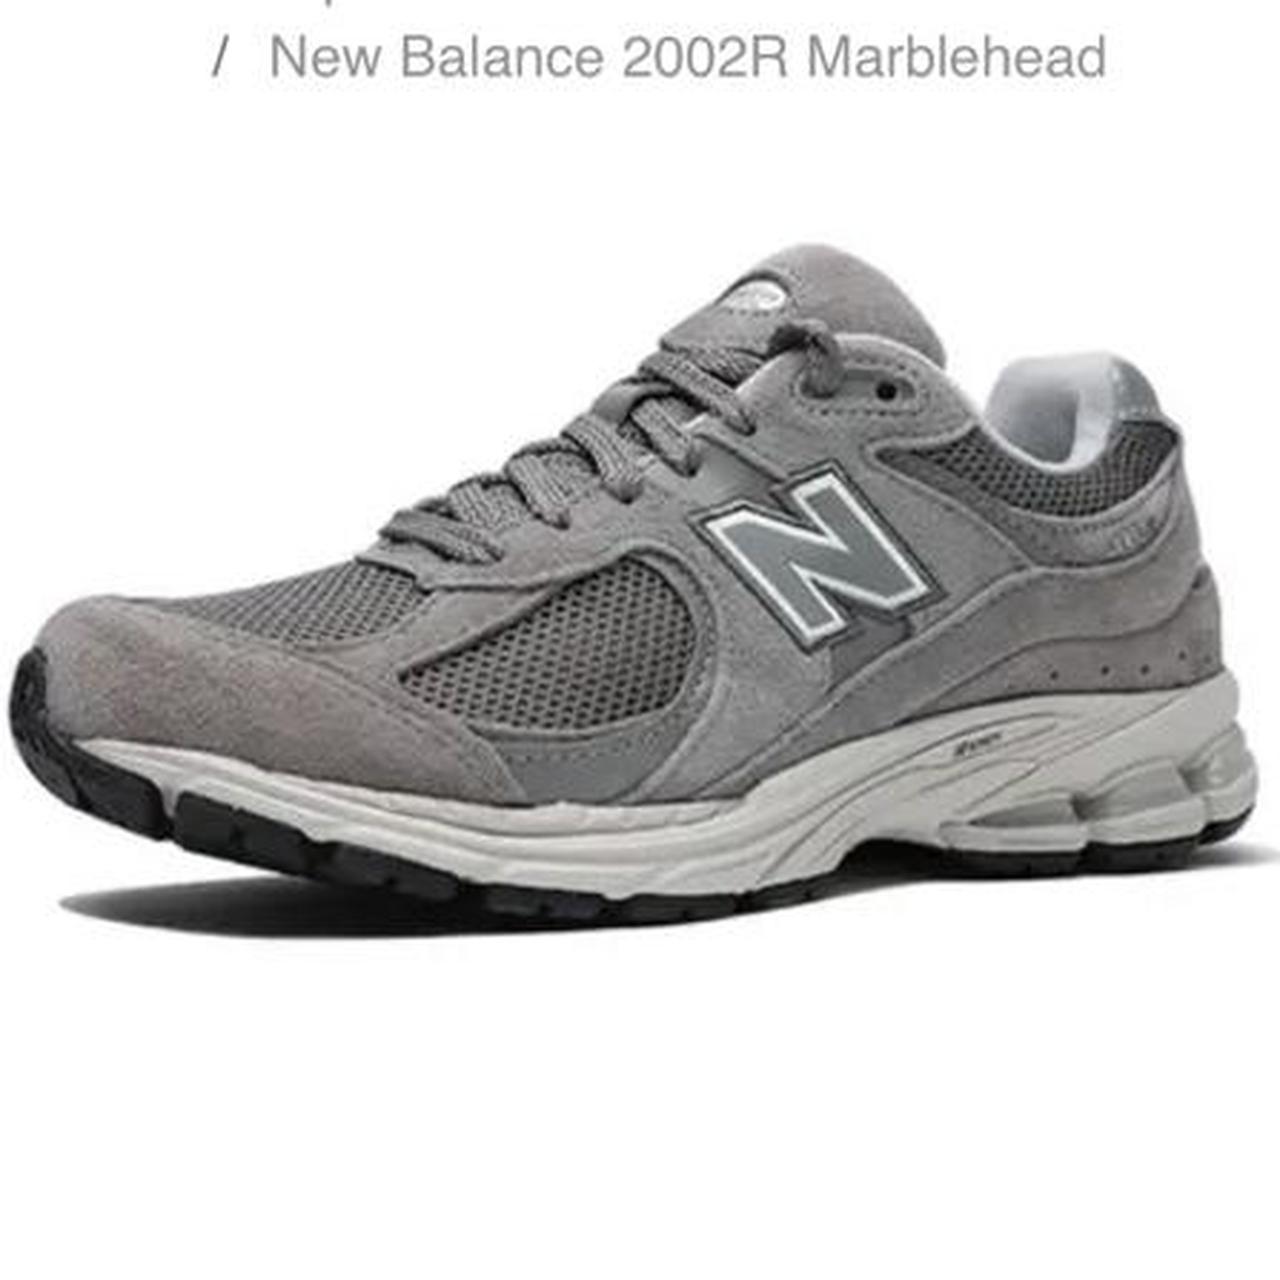 New Balance 2002R marblehead trainers. Size UK 4... - Depop